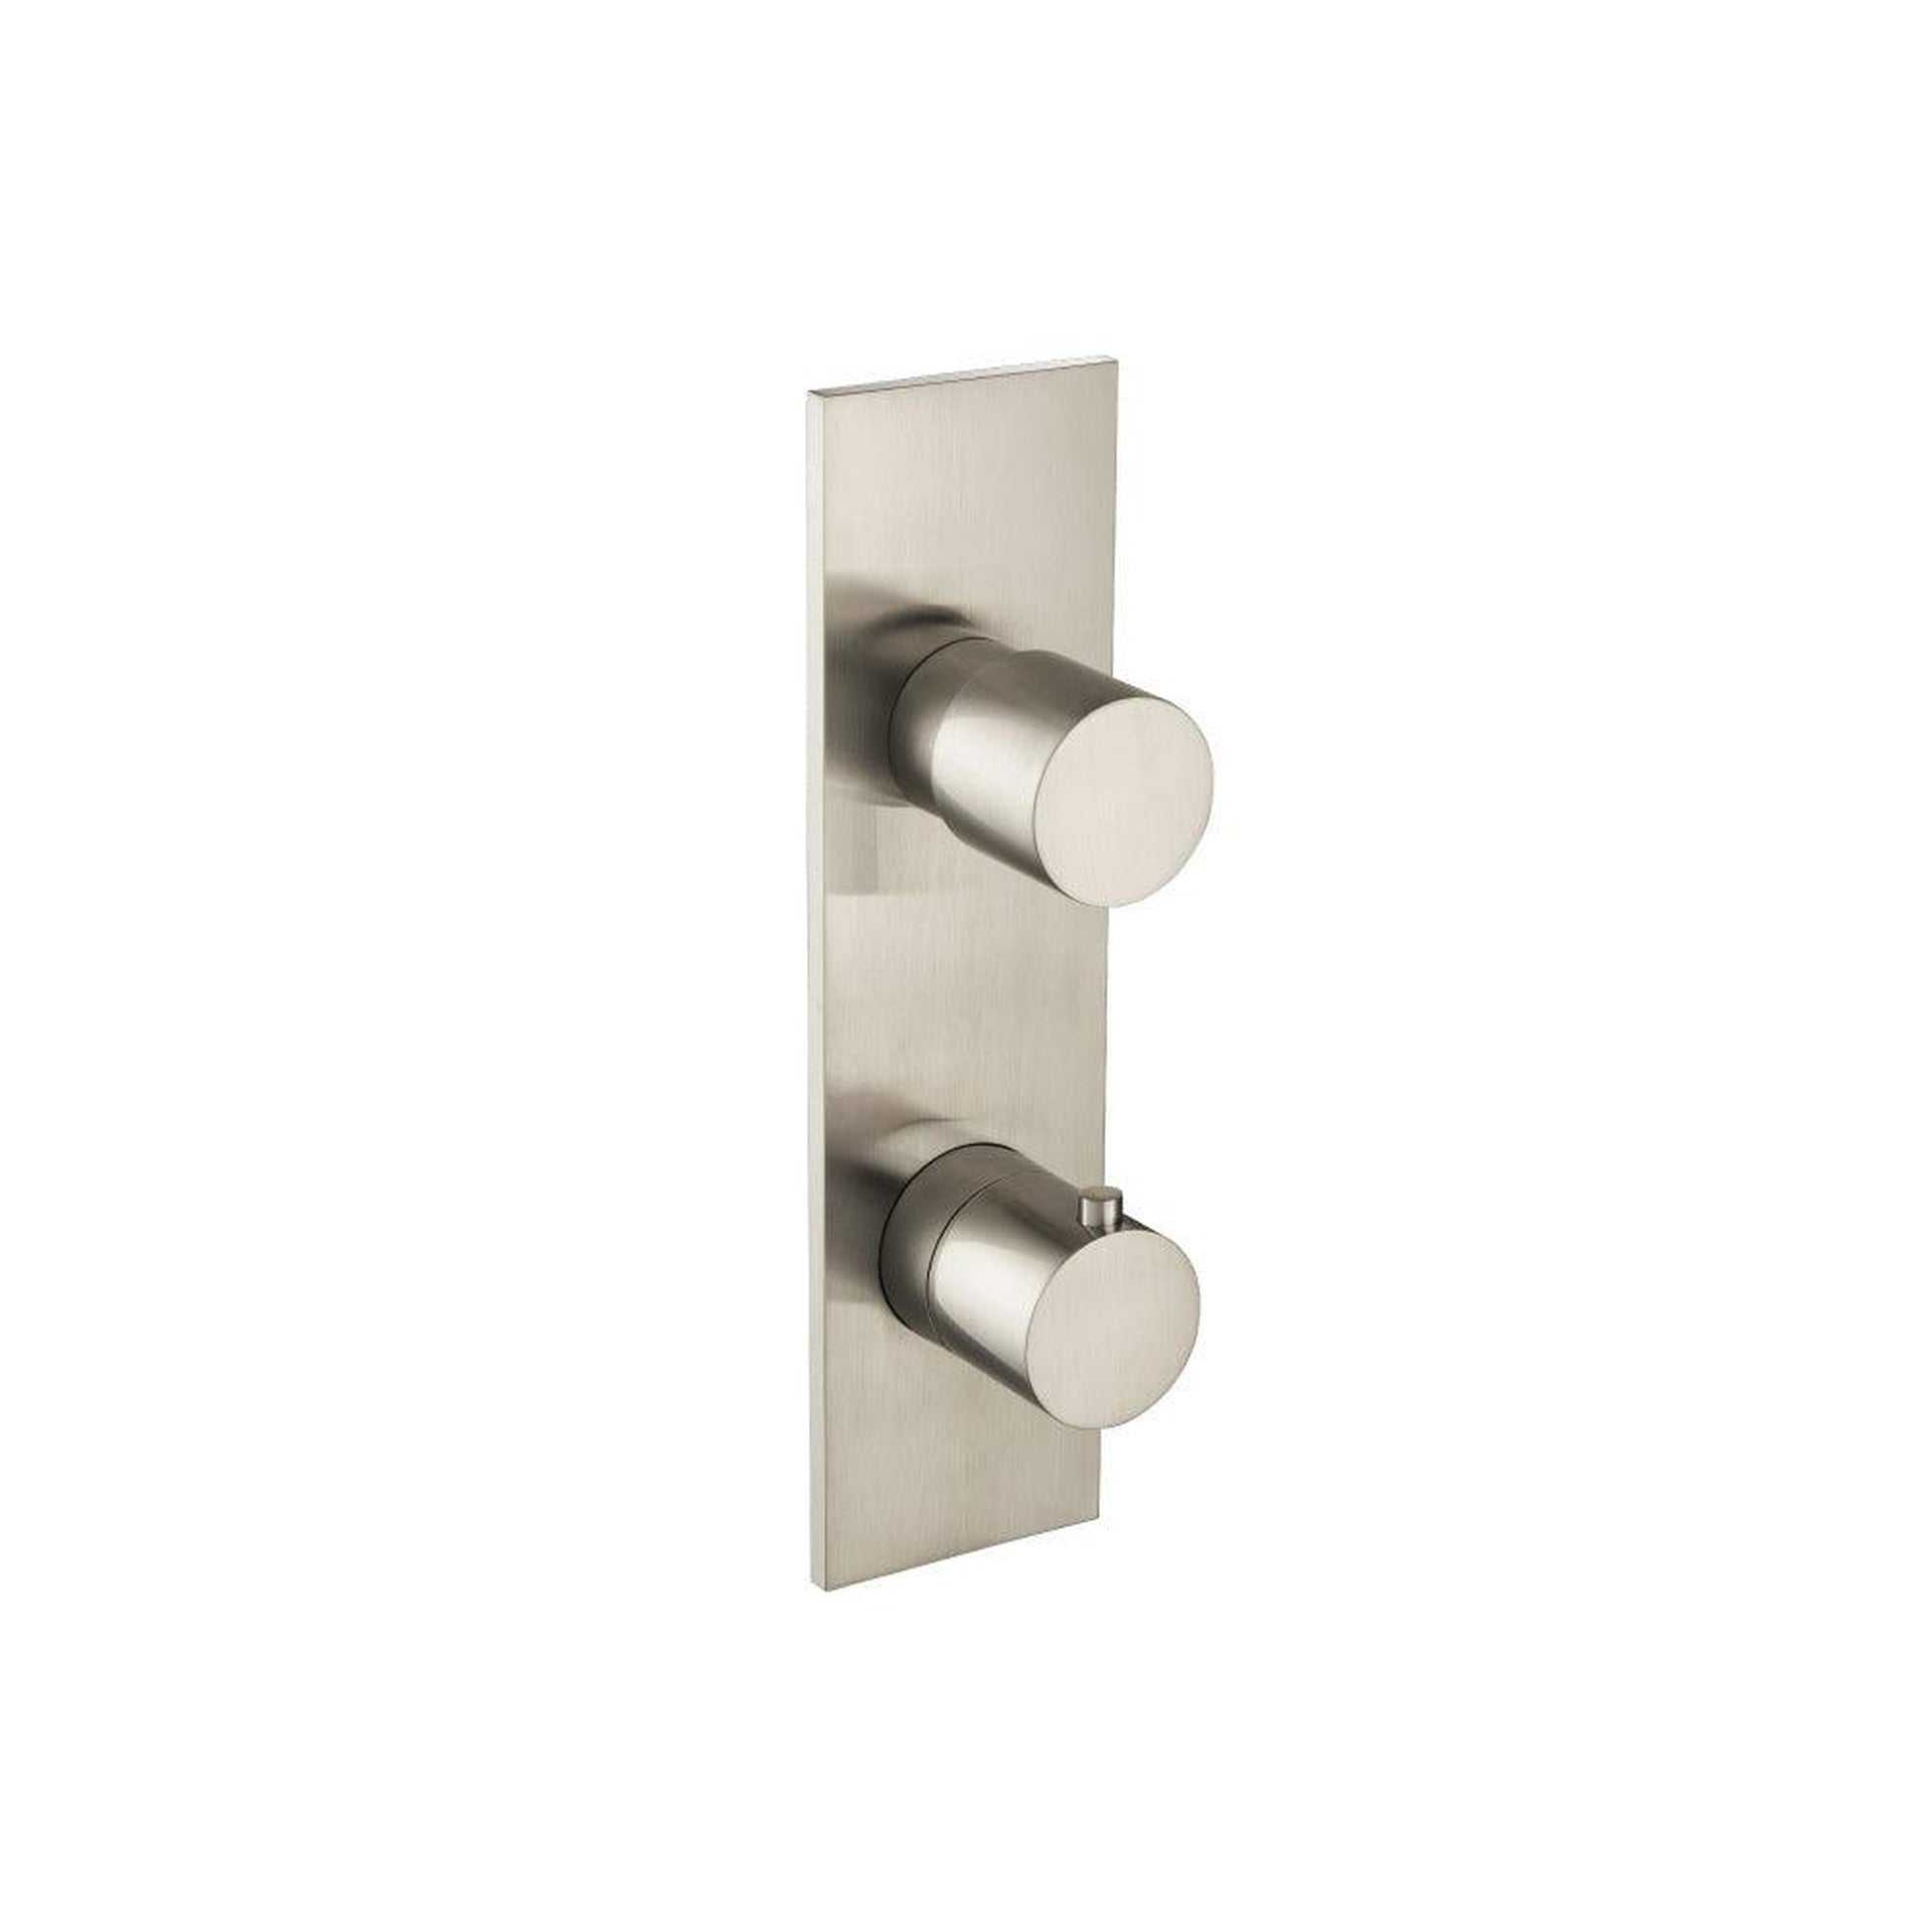 Isenberg Serie 100 3/4" Single Output Horizontal Thermostatic Shower Valve and Trim in Brushed Nickel (100.2720BN)